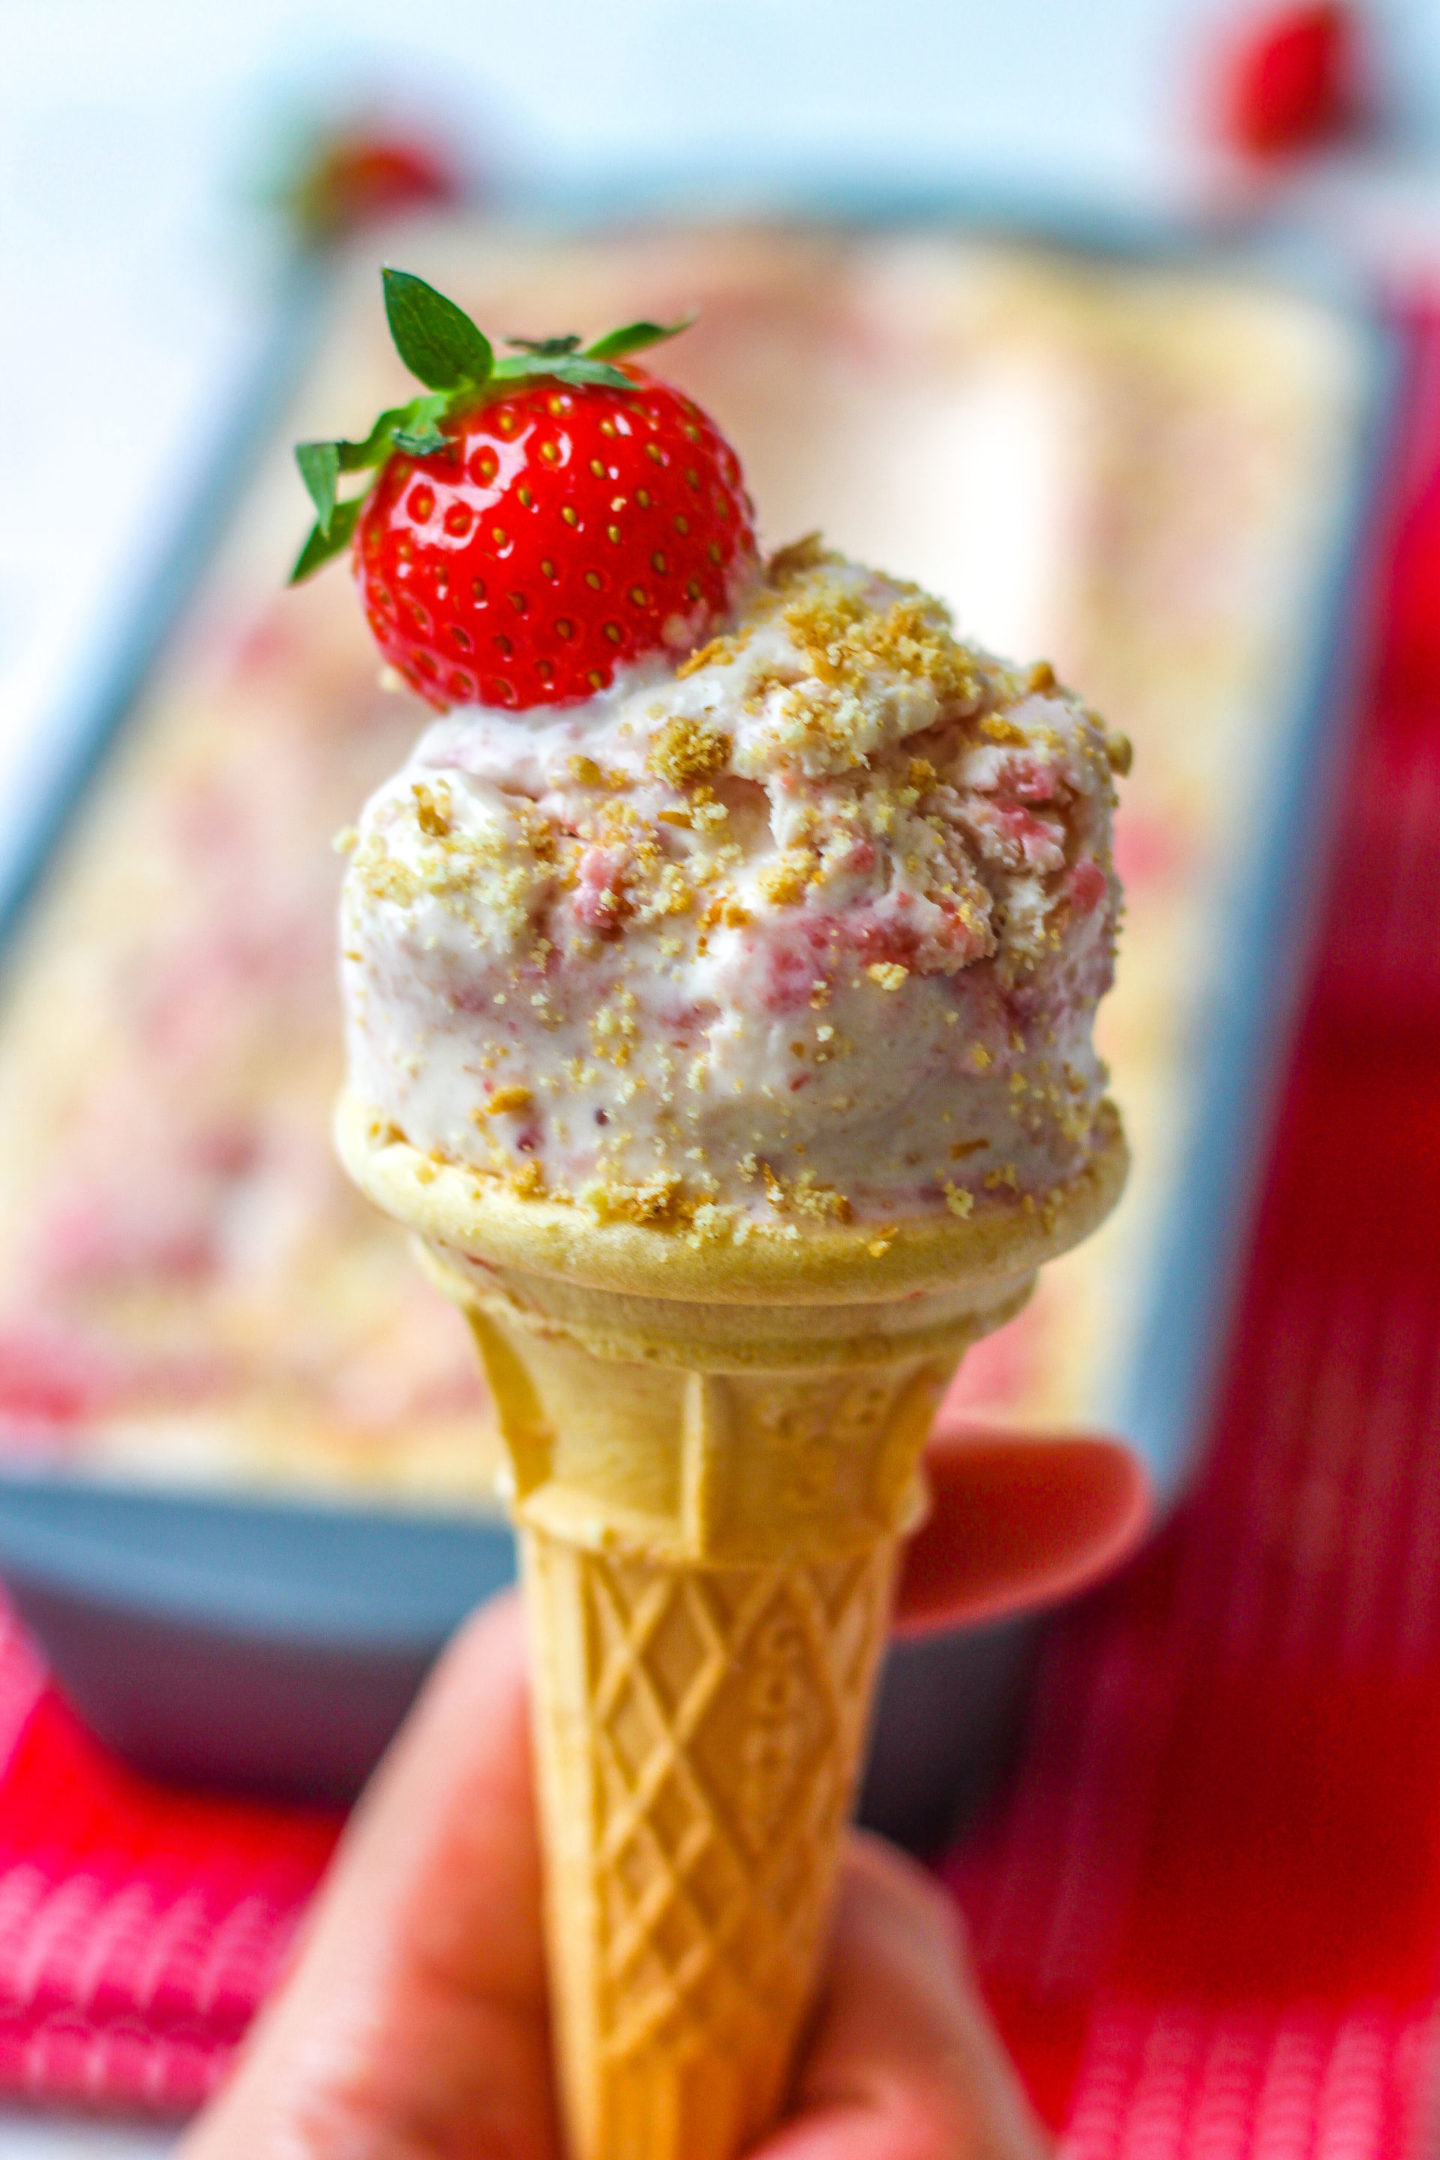 ice cream cone of strawberry cheesecake ice cream, topped with a fresh strawberry